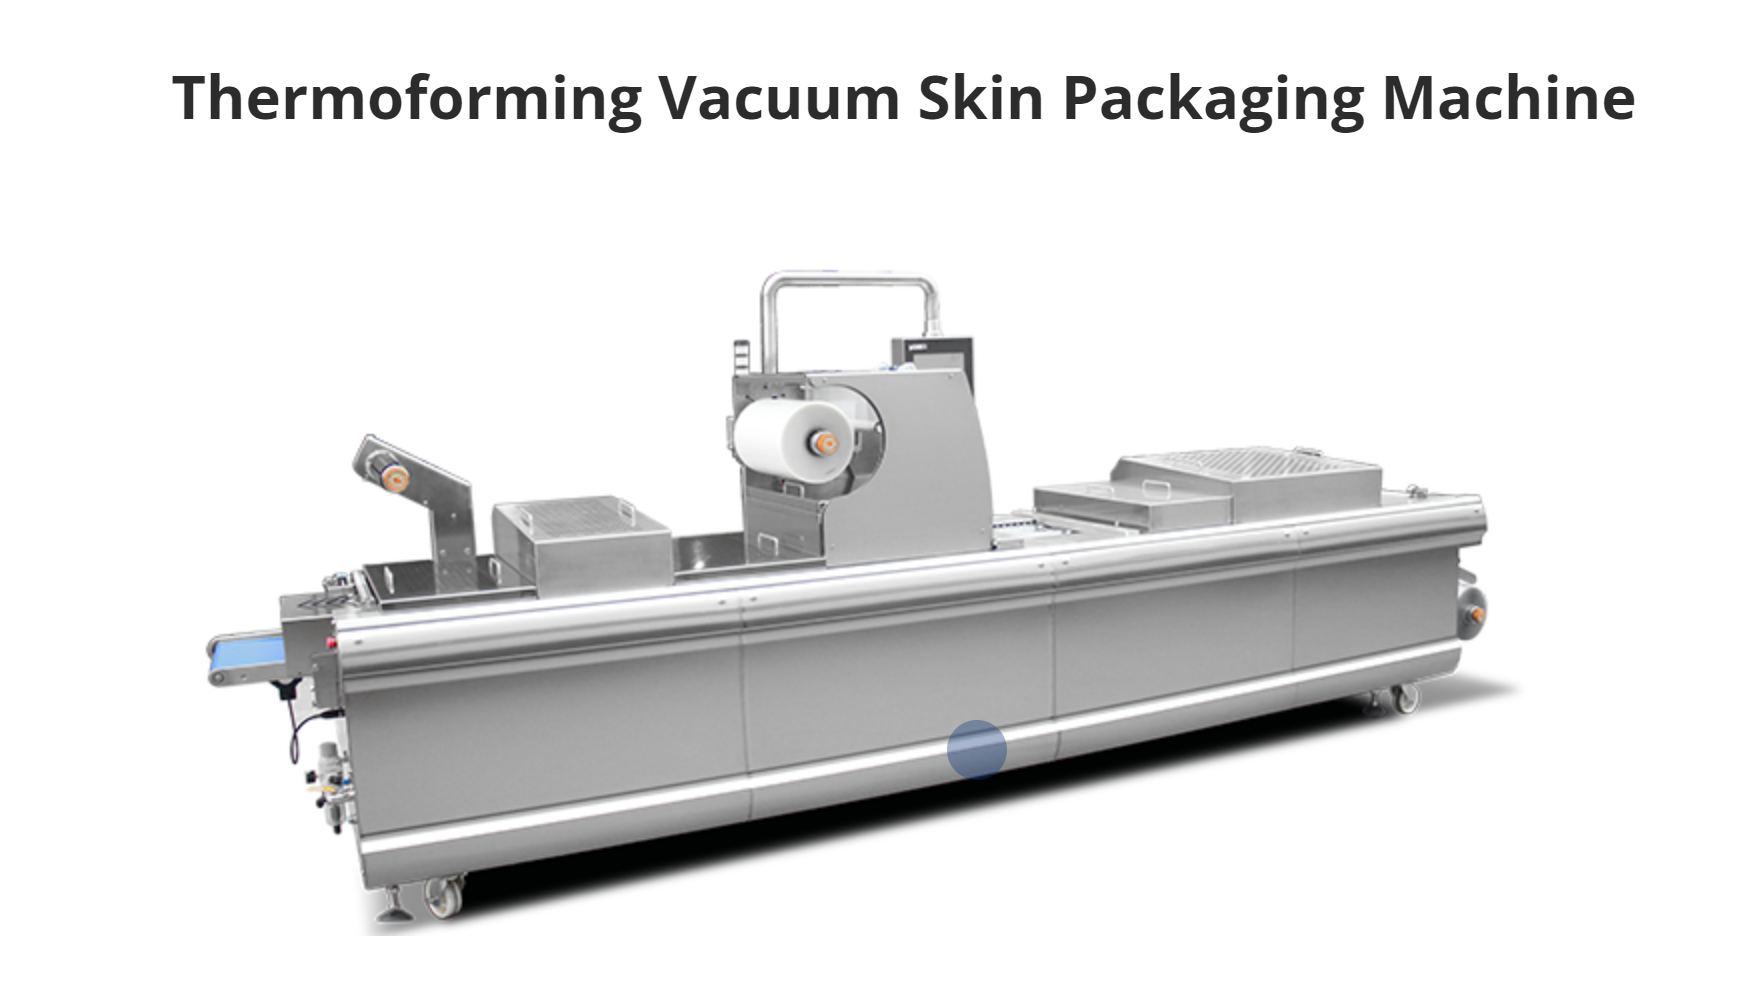 What is Thermoforming VSP vacuum skin packaging machine